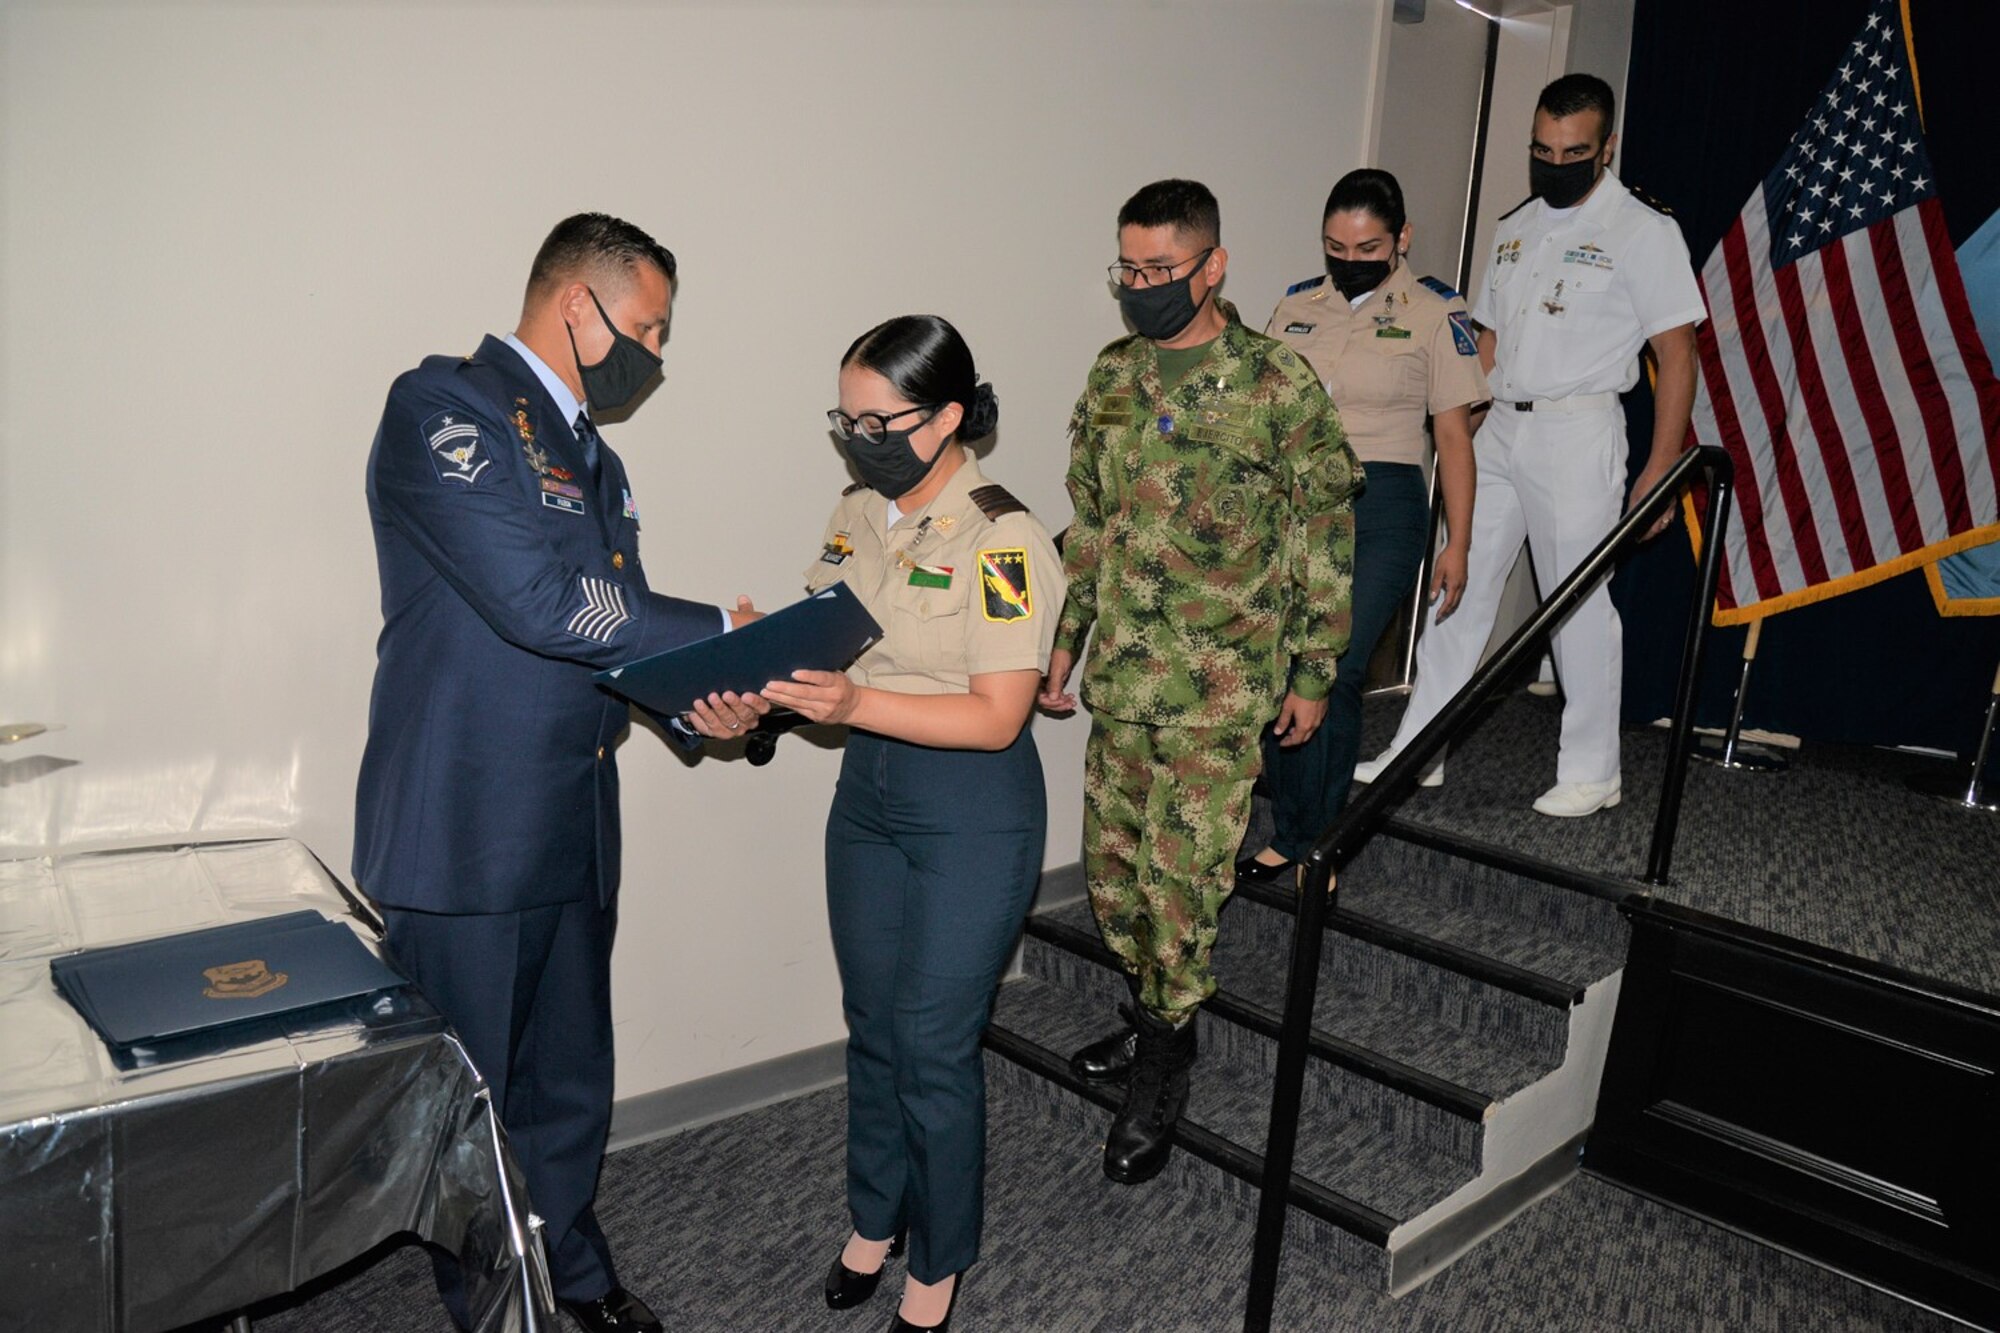 Members of the Inter-American Air Forces Academy’s Class 2021-B receive their graduation certificates at the ceremony Aug. 10, 2021, at Joint Base San Antonio-Lackland, Texas. Class 2021-B was the largest in-person class to graduate from the IAAFA since the COVID-19 pandemic struck approximately 17 months ago.